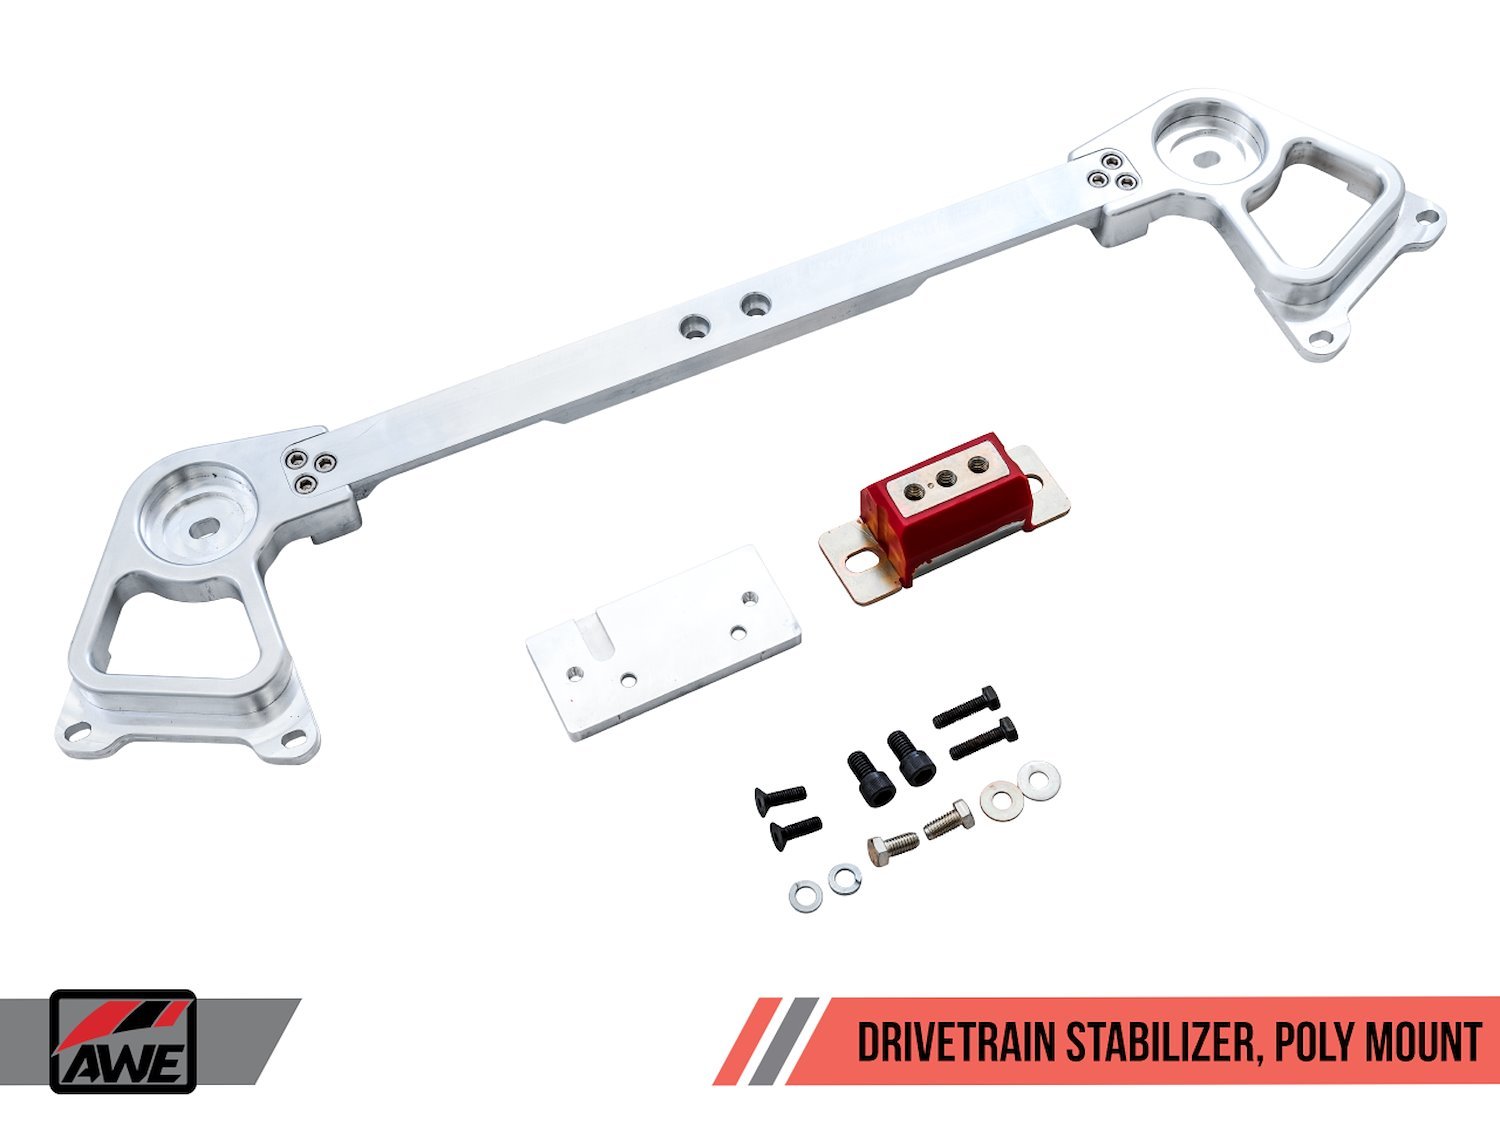 urethane Mount Package for AWE Drivetrain Stabilizer (DTS) - Mounts Only